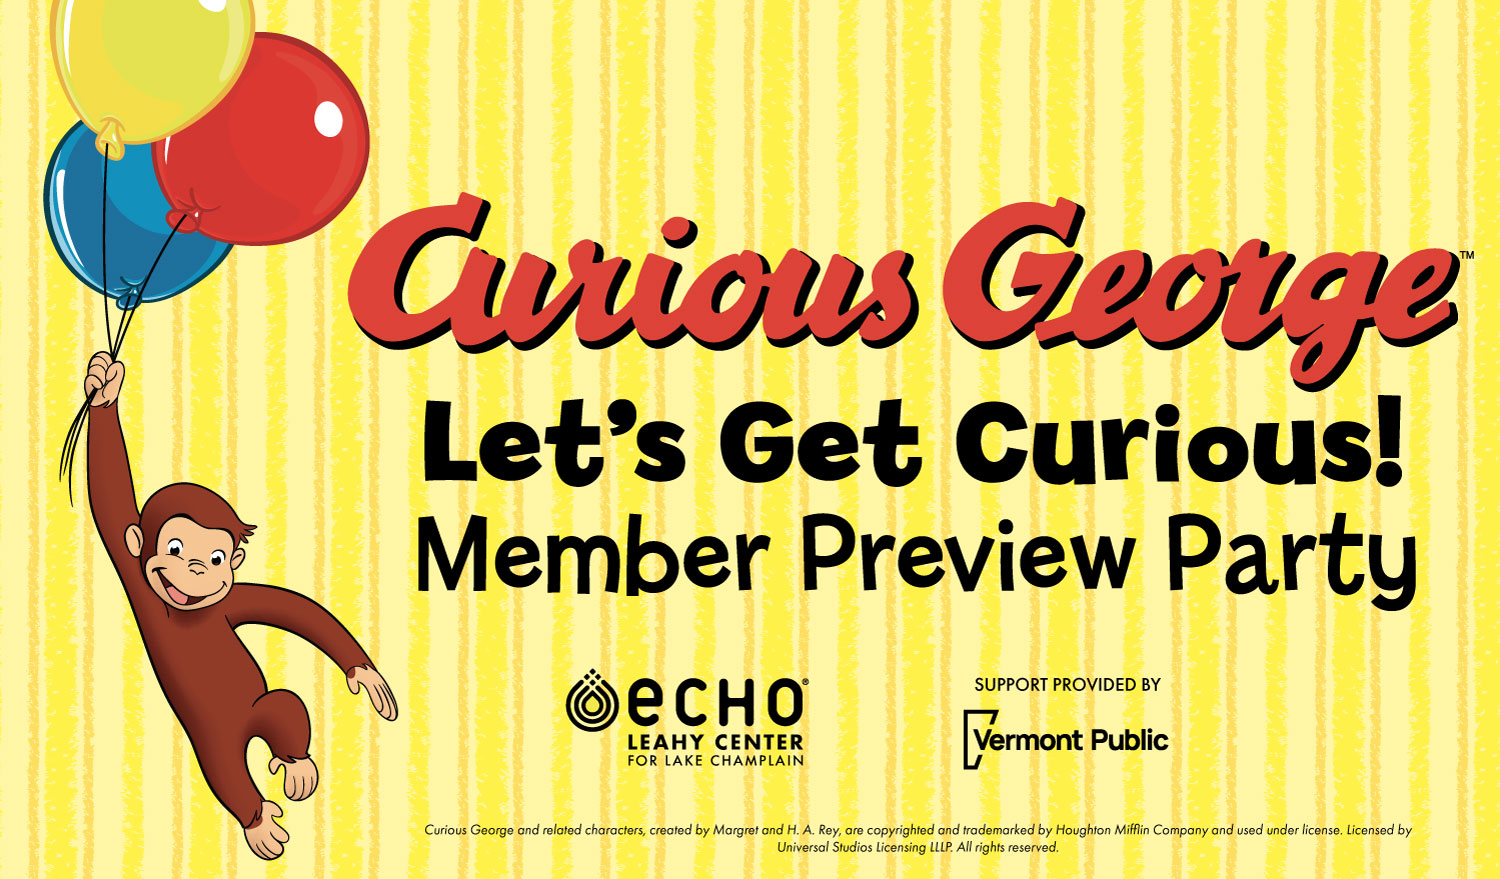 Curious George Let's Get Curious! Member Preview Party at ECHO, Support Provided by Vermont Public